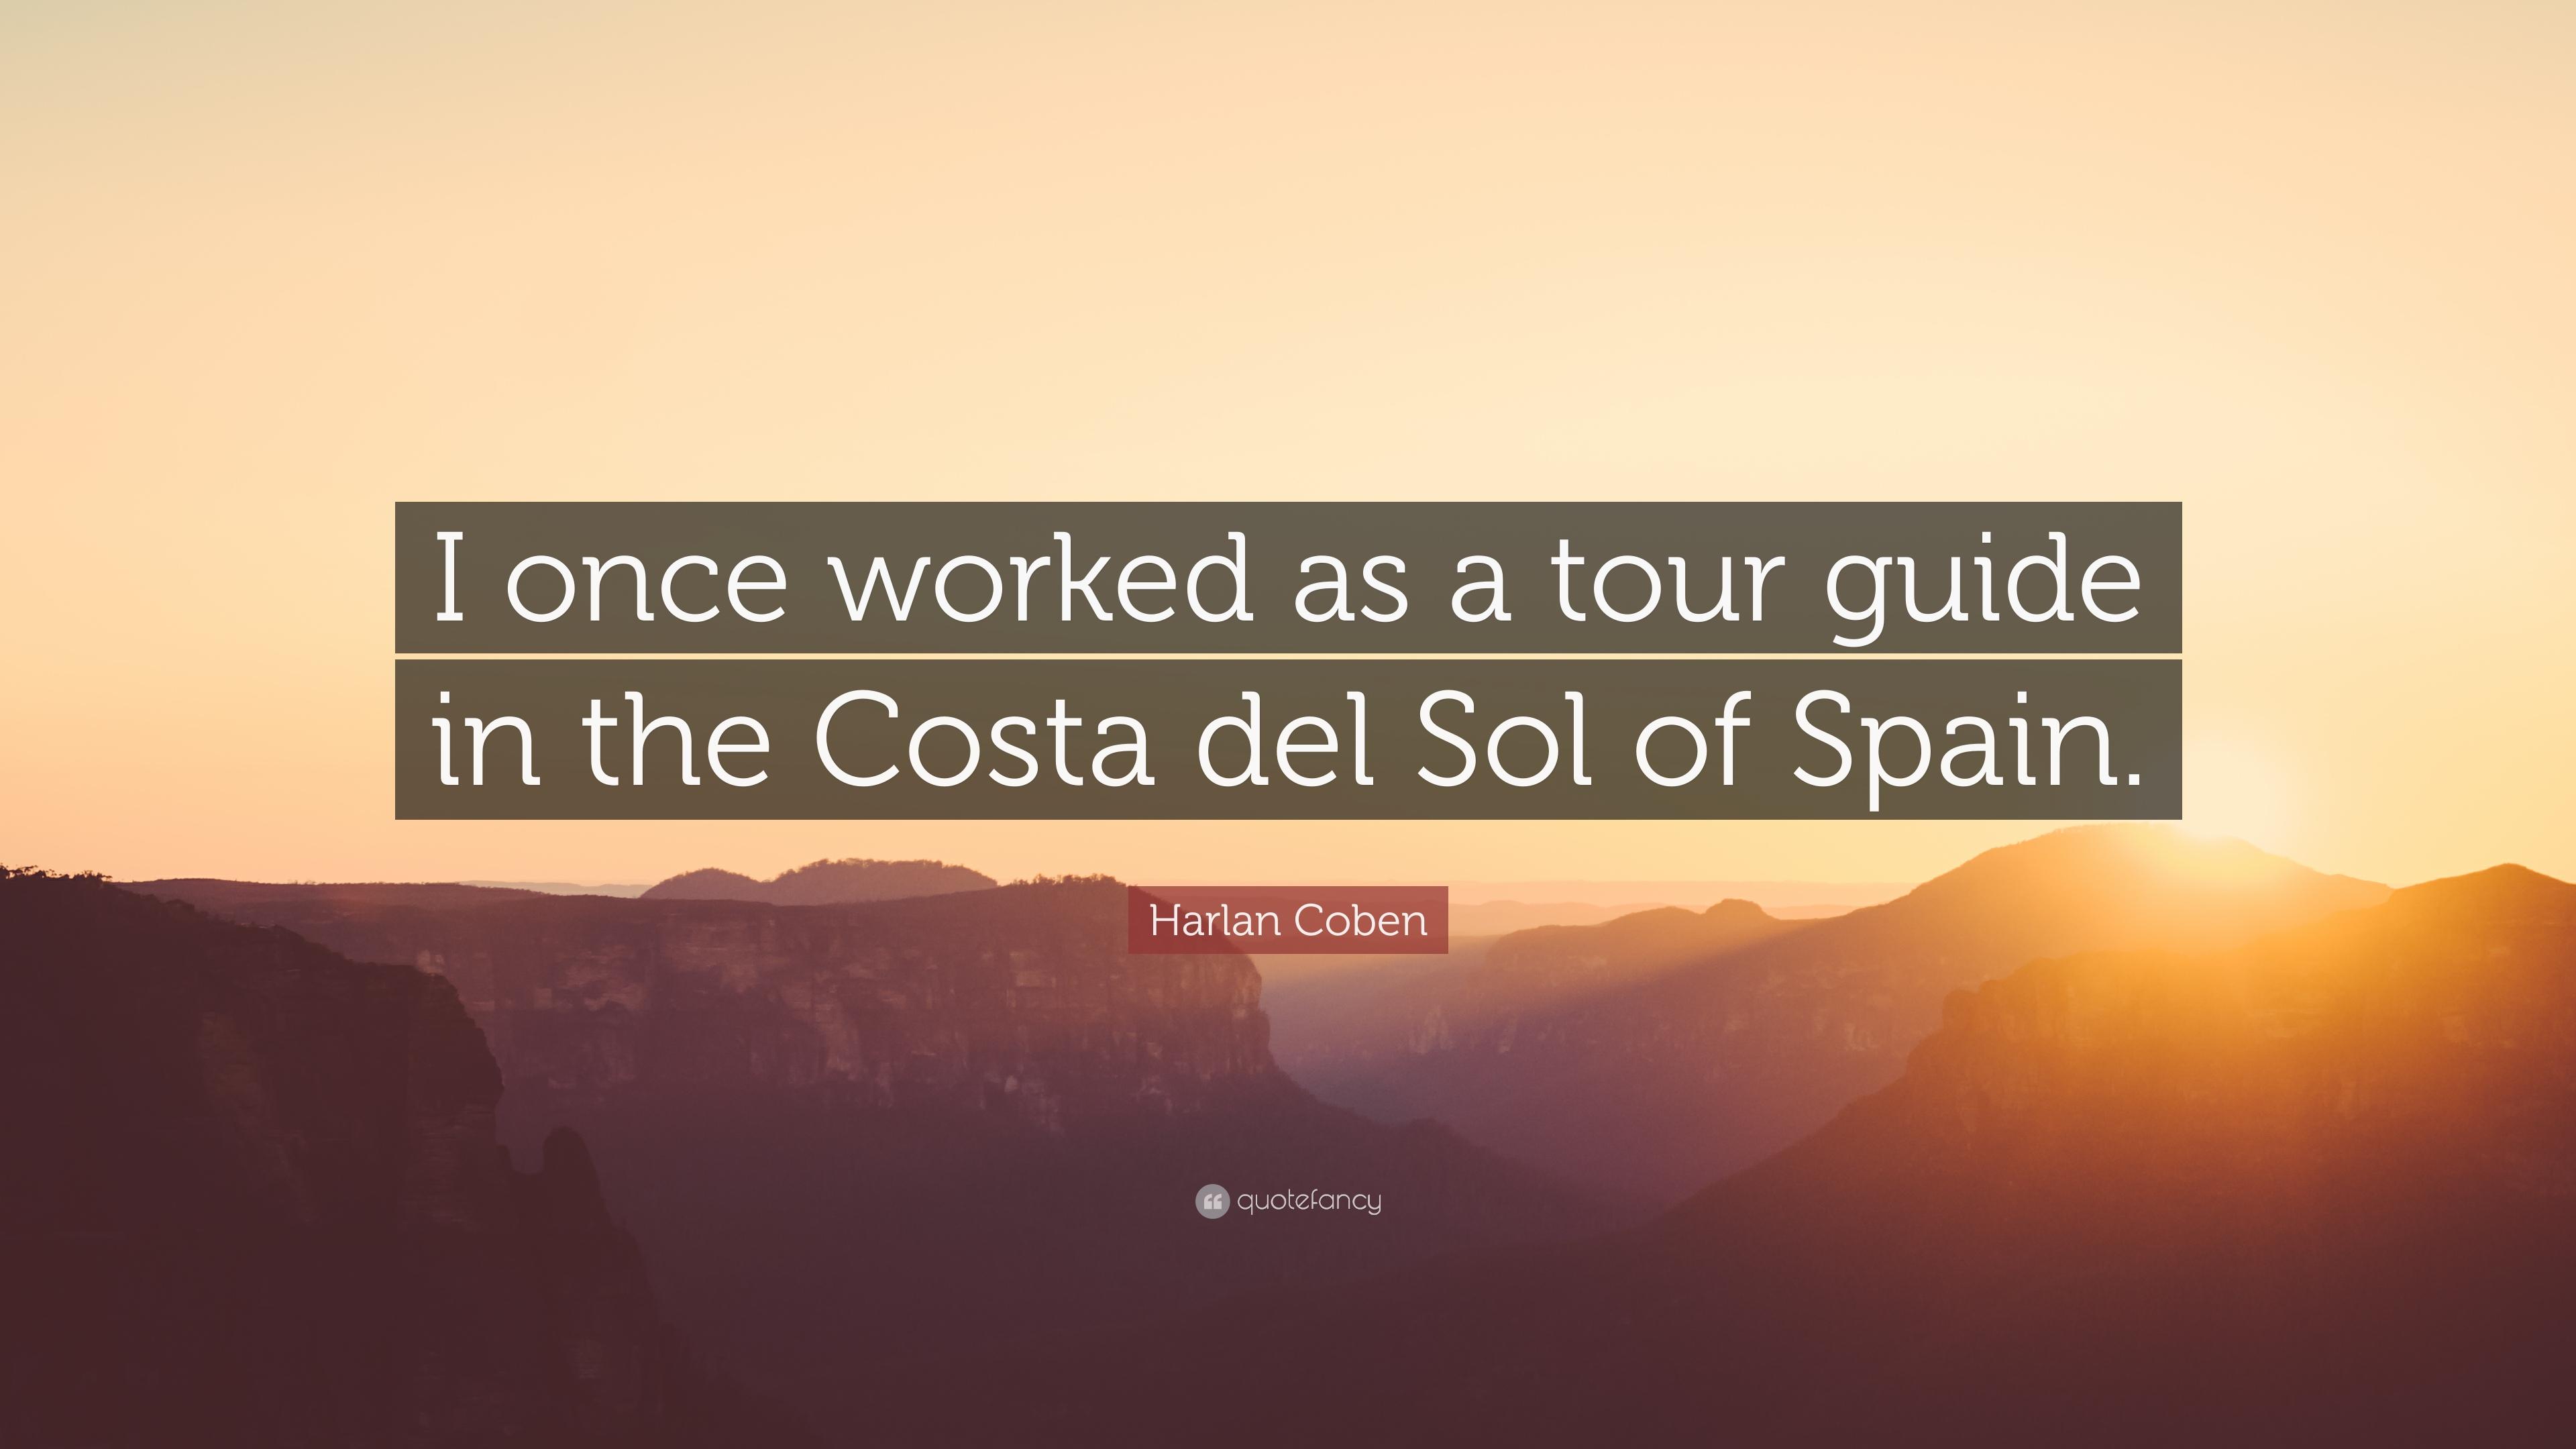 Harlan Coben Quote: “I once worked as a tour guide in the Costa del